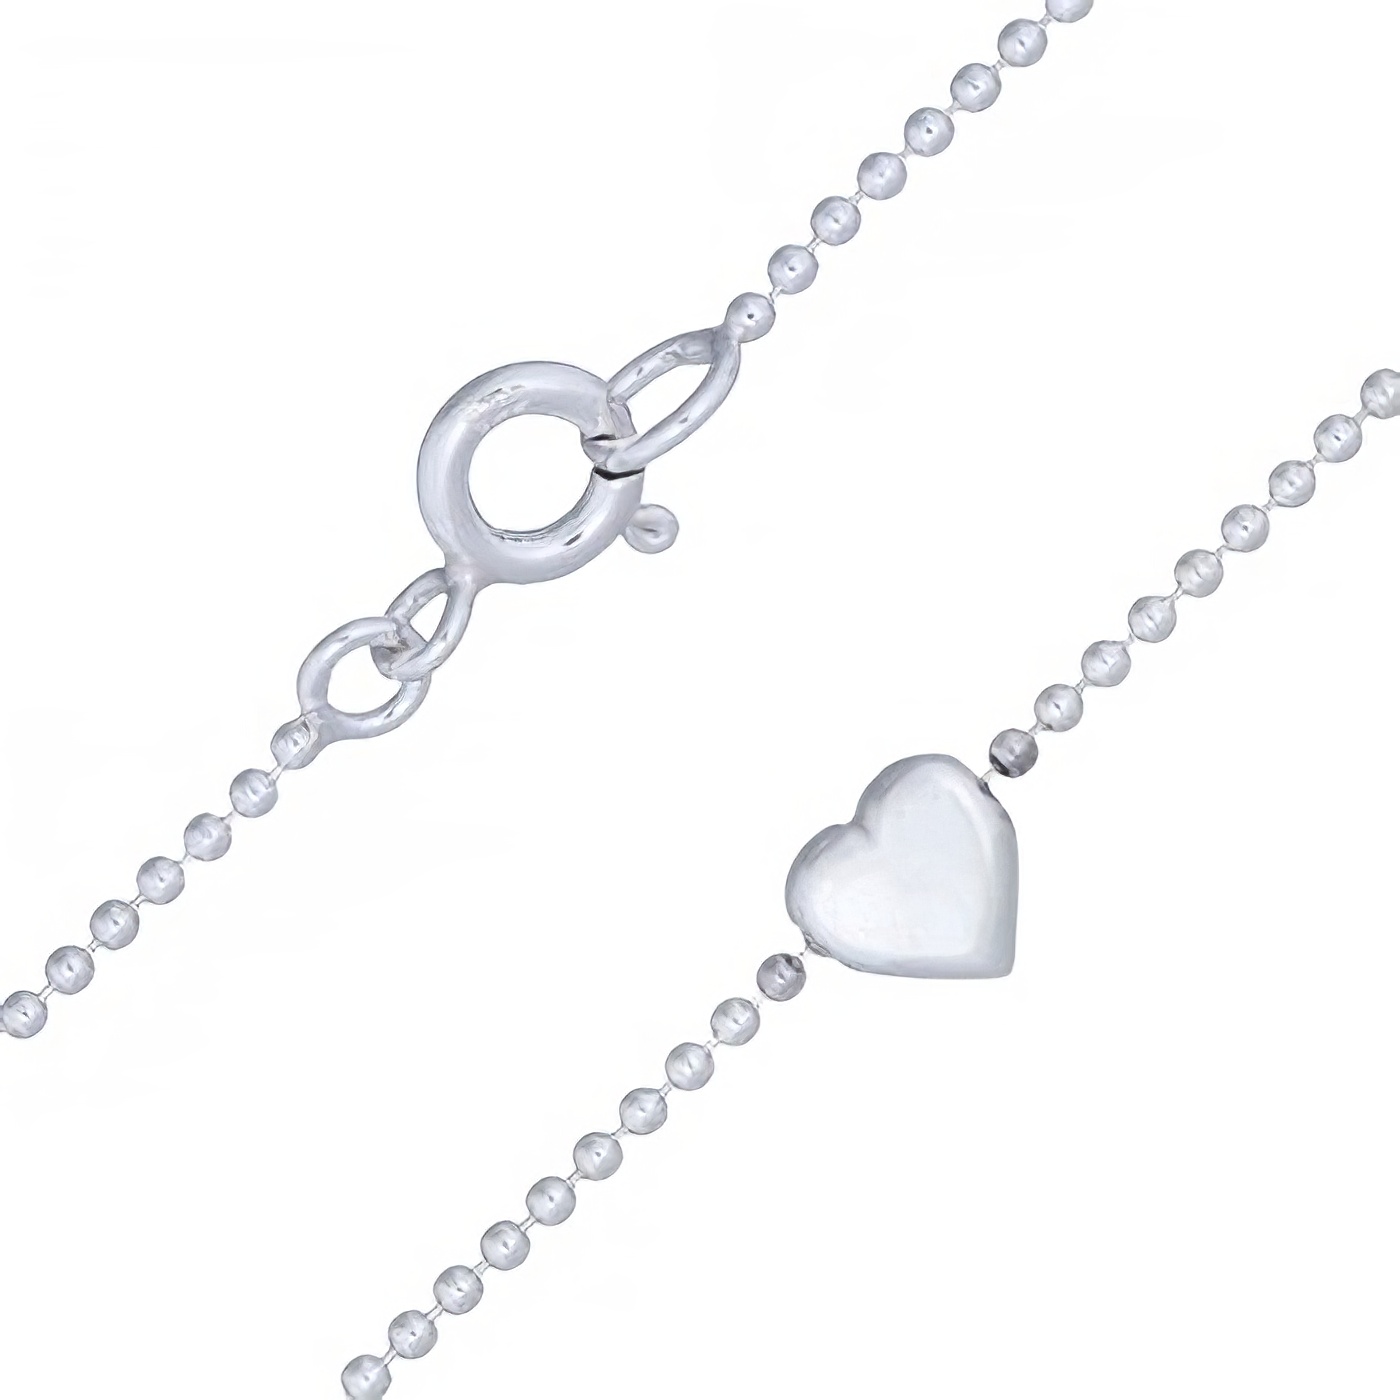 Little Heart Charm In 925 Sterling Silver Bead Chain Anklet by BeYindi 